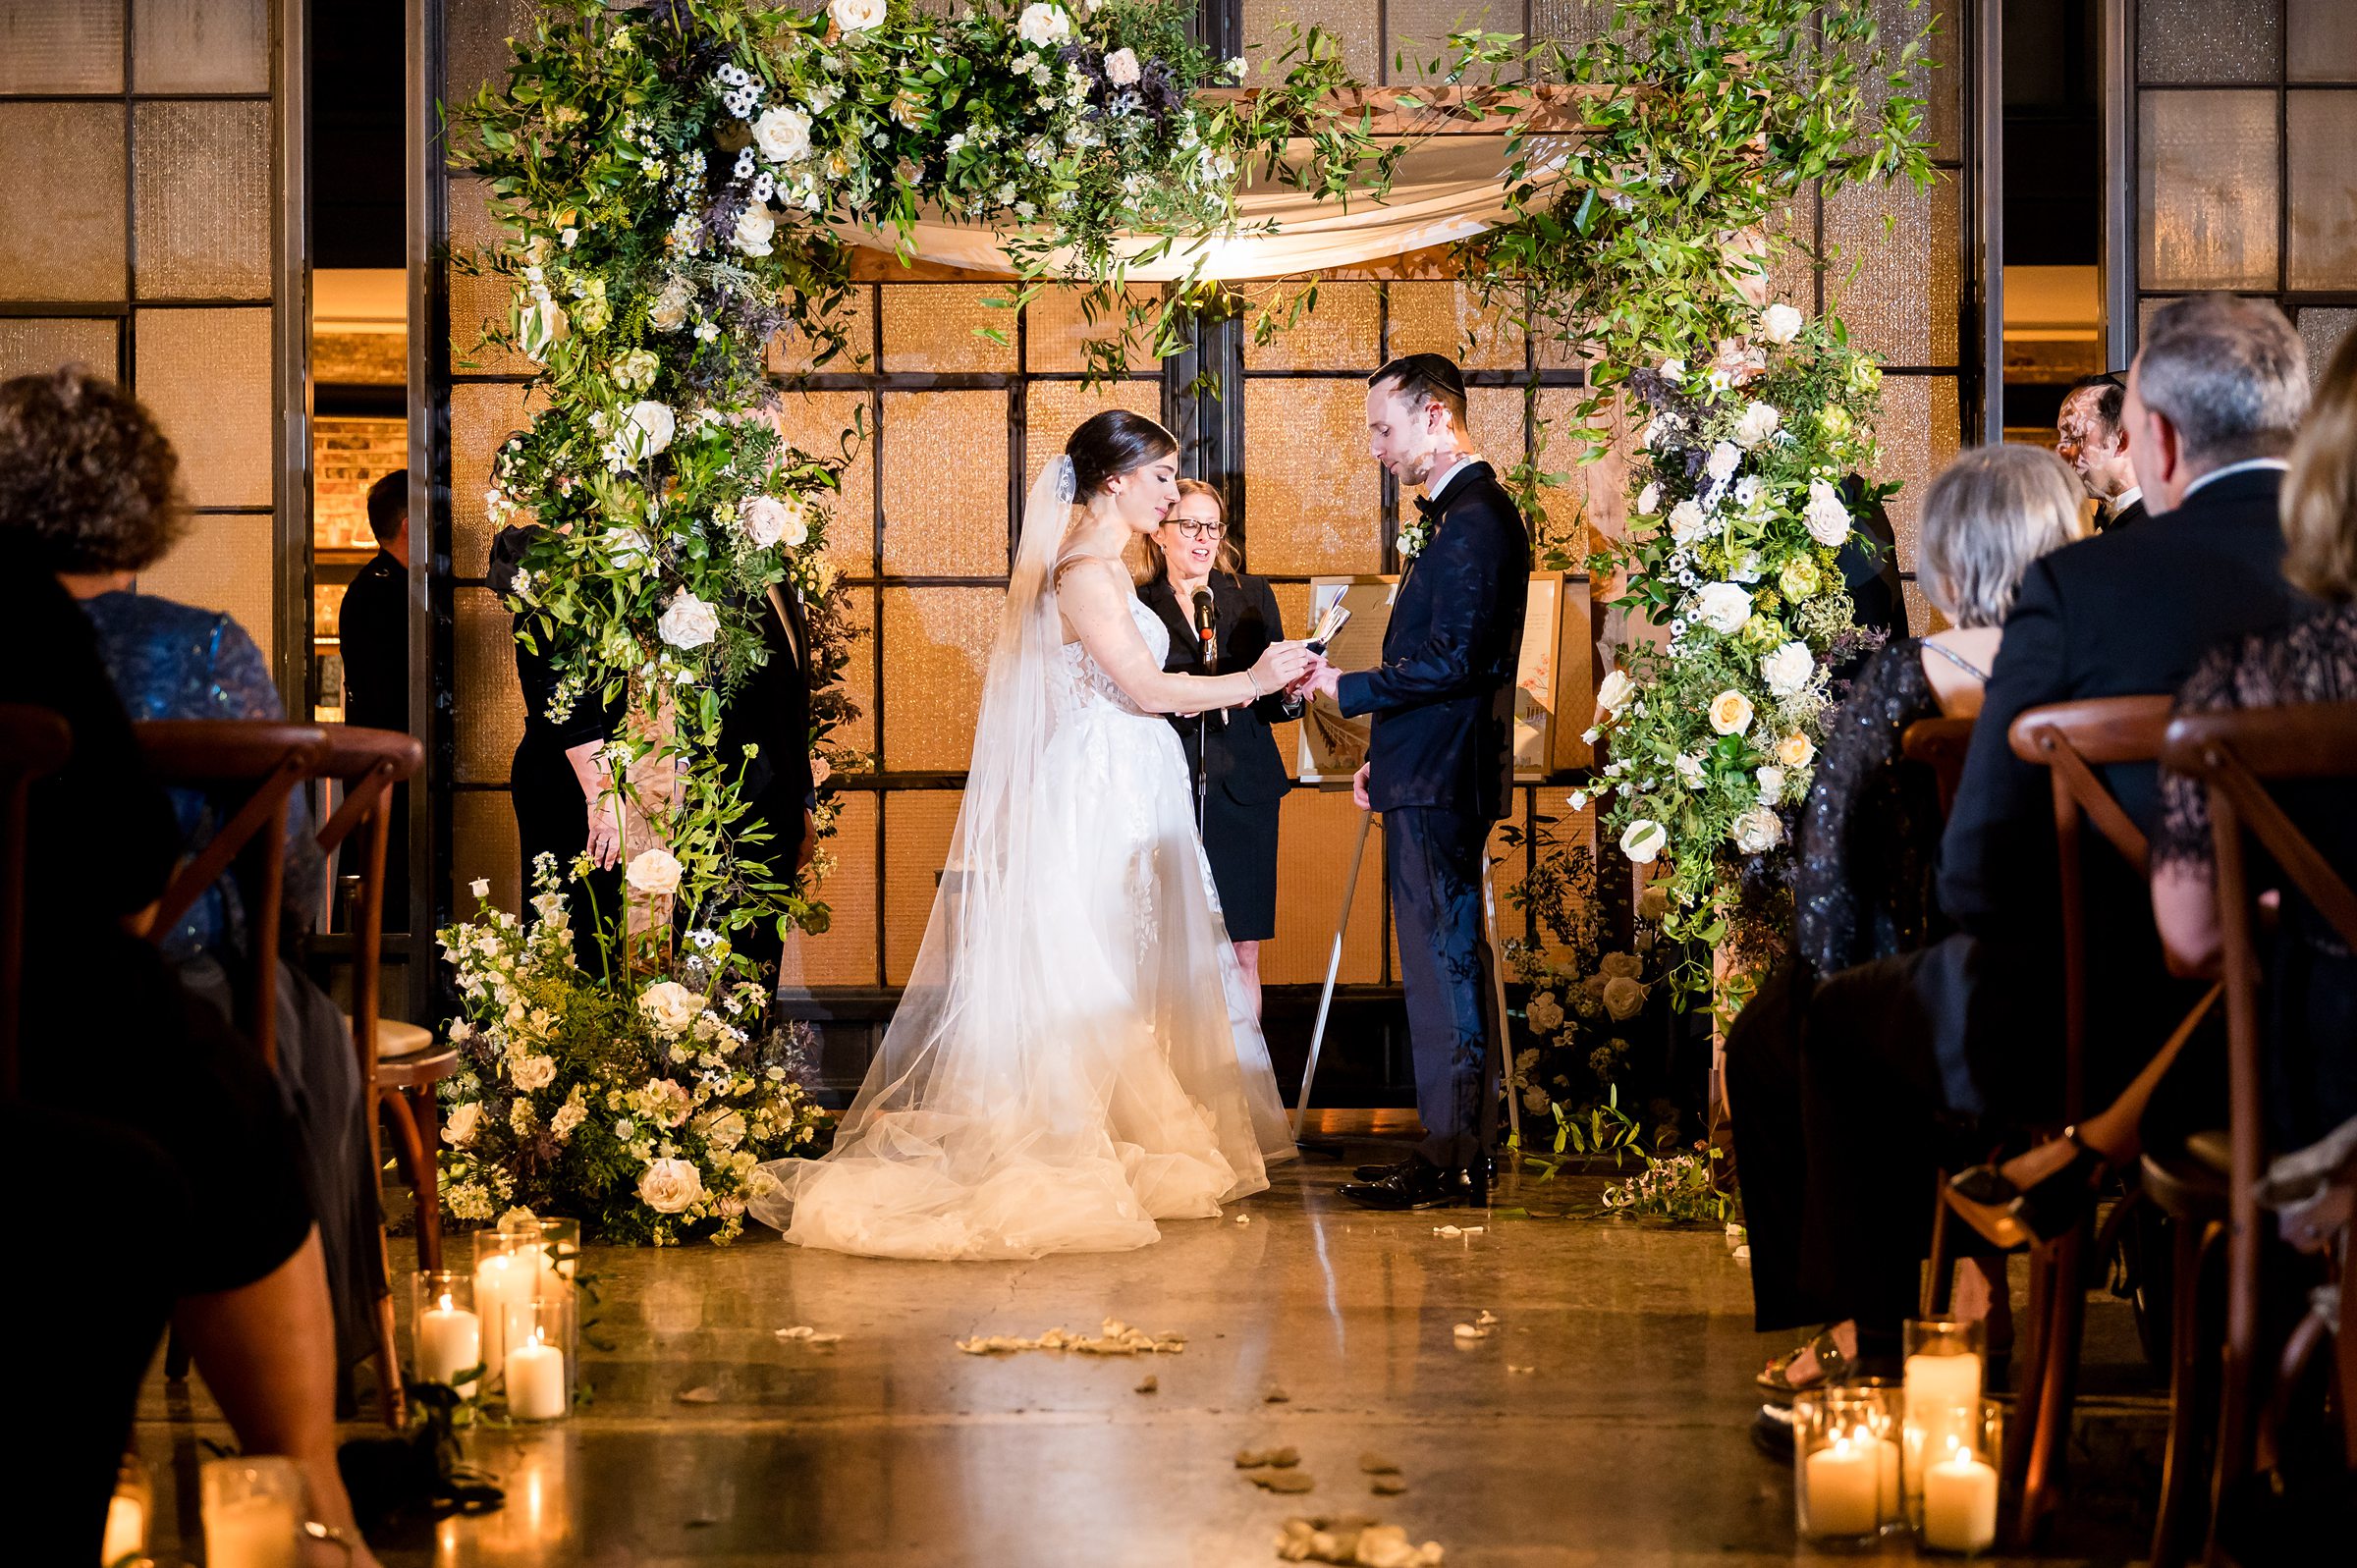 At a Lilah Events wedding, the bride and groom exchange vows under a beautiful floral arch.